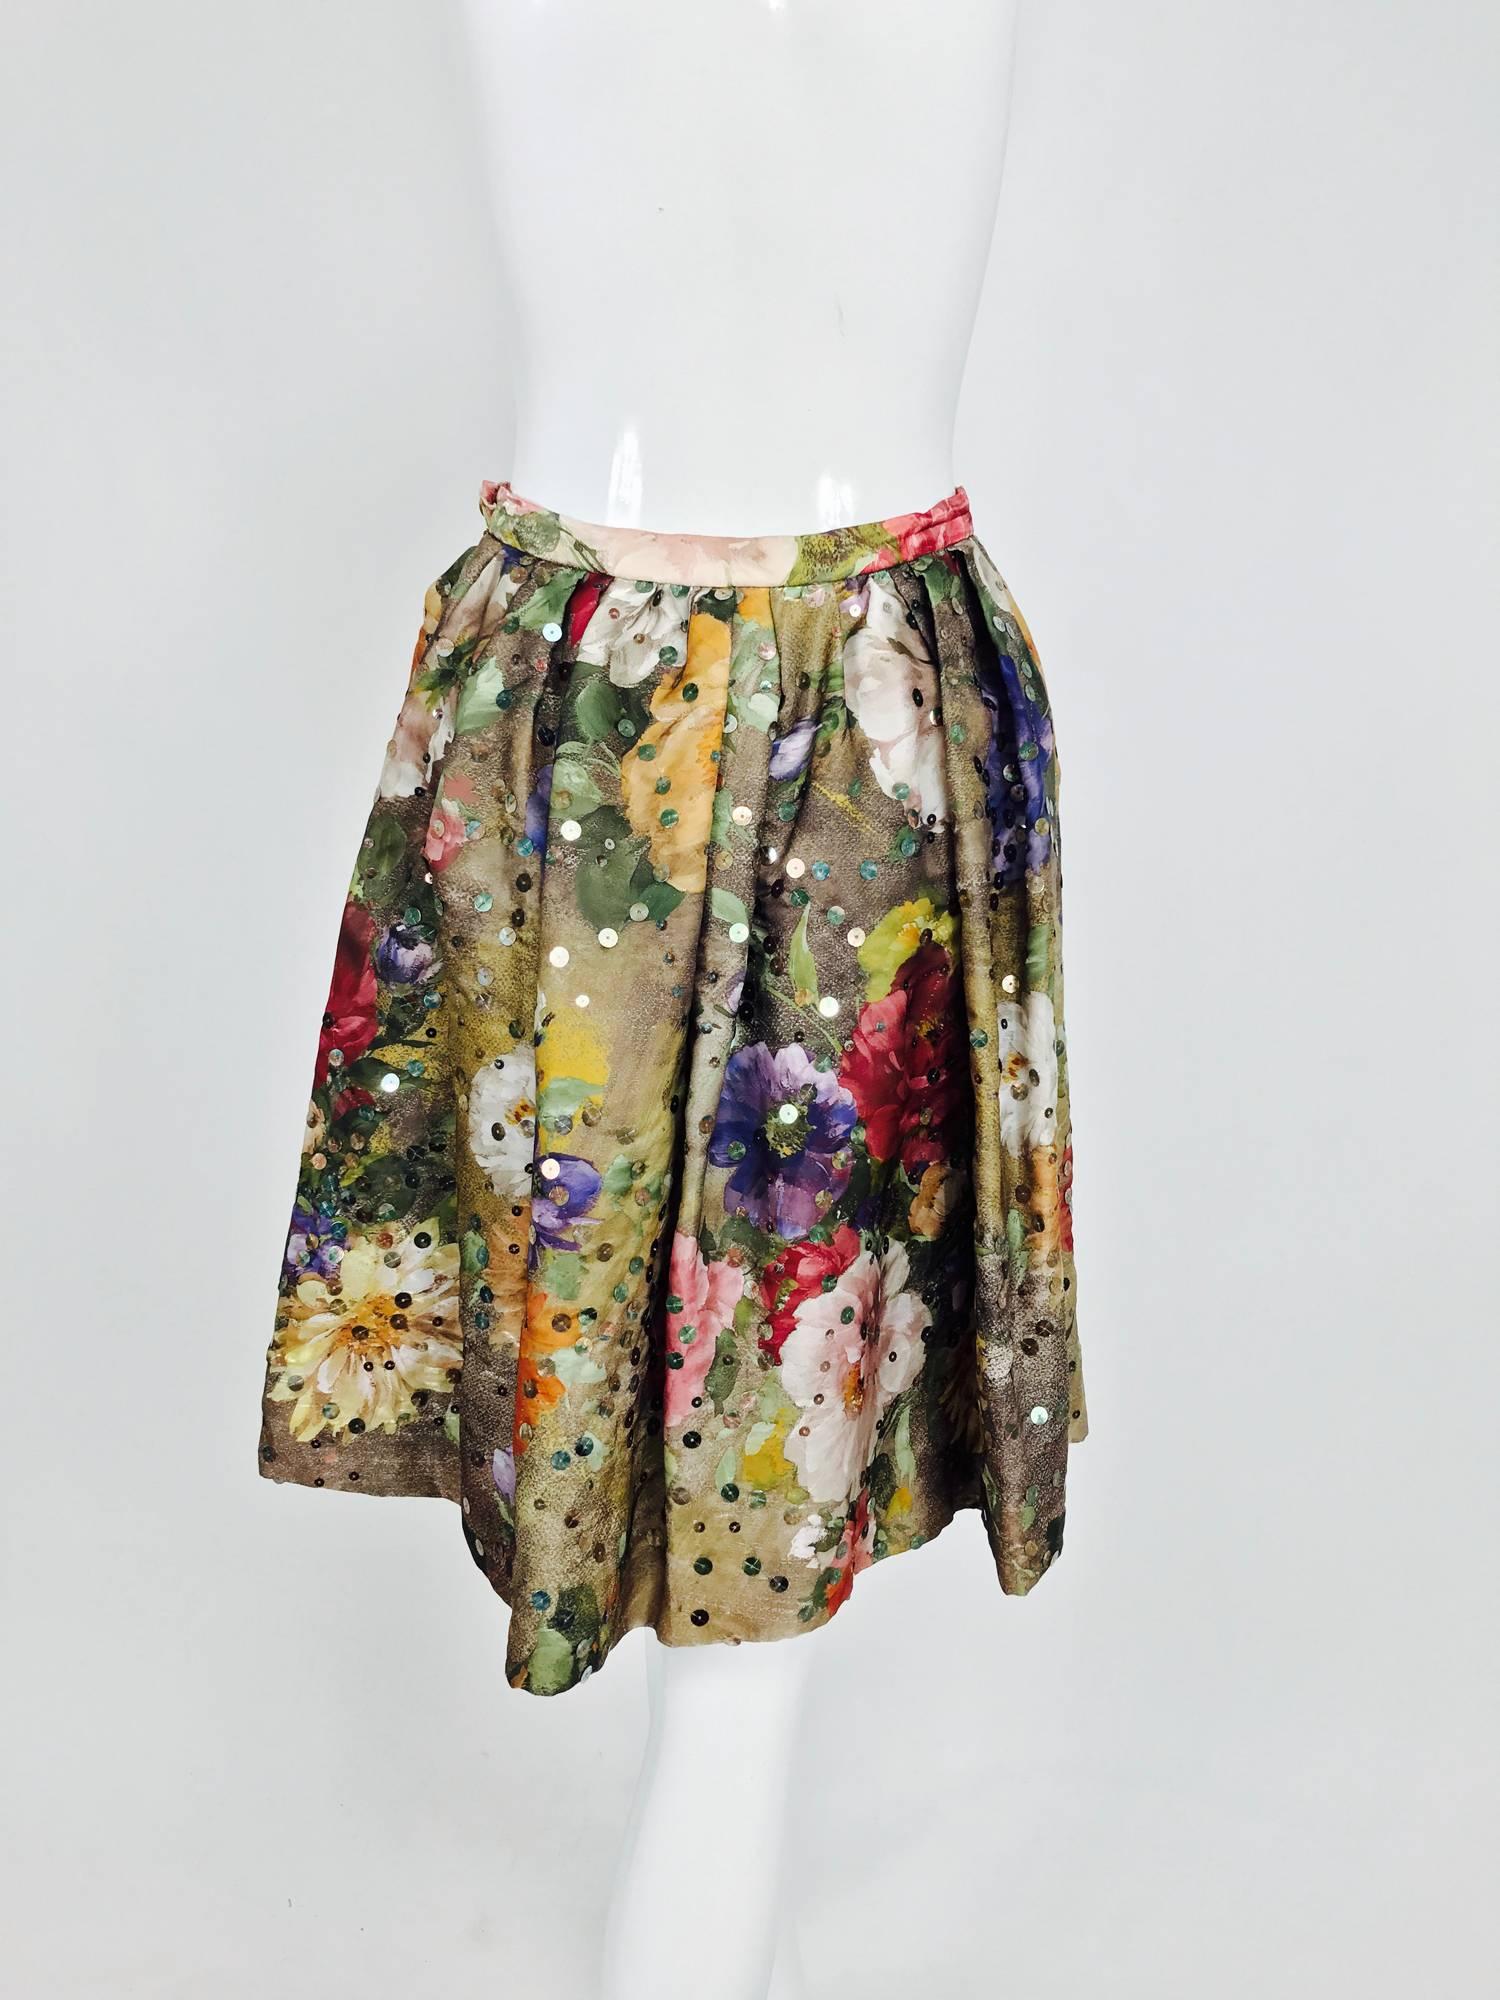 Vintage Christian LaCroix sequined floral satin open pleated skirt 1980s 1